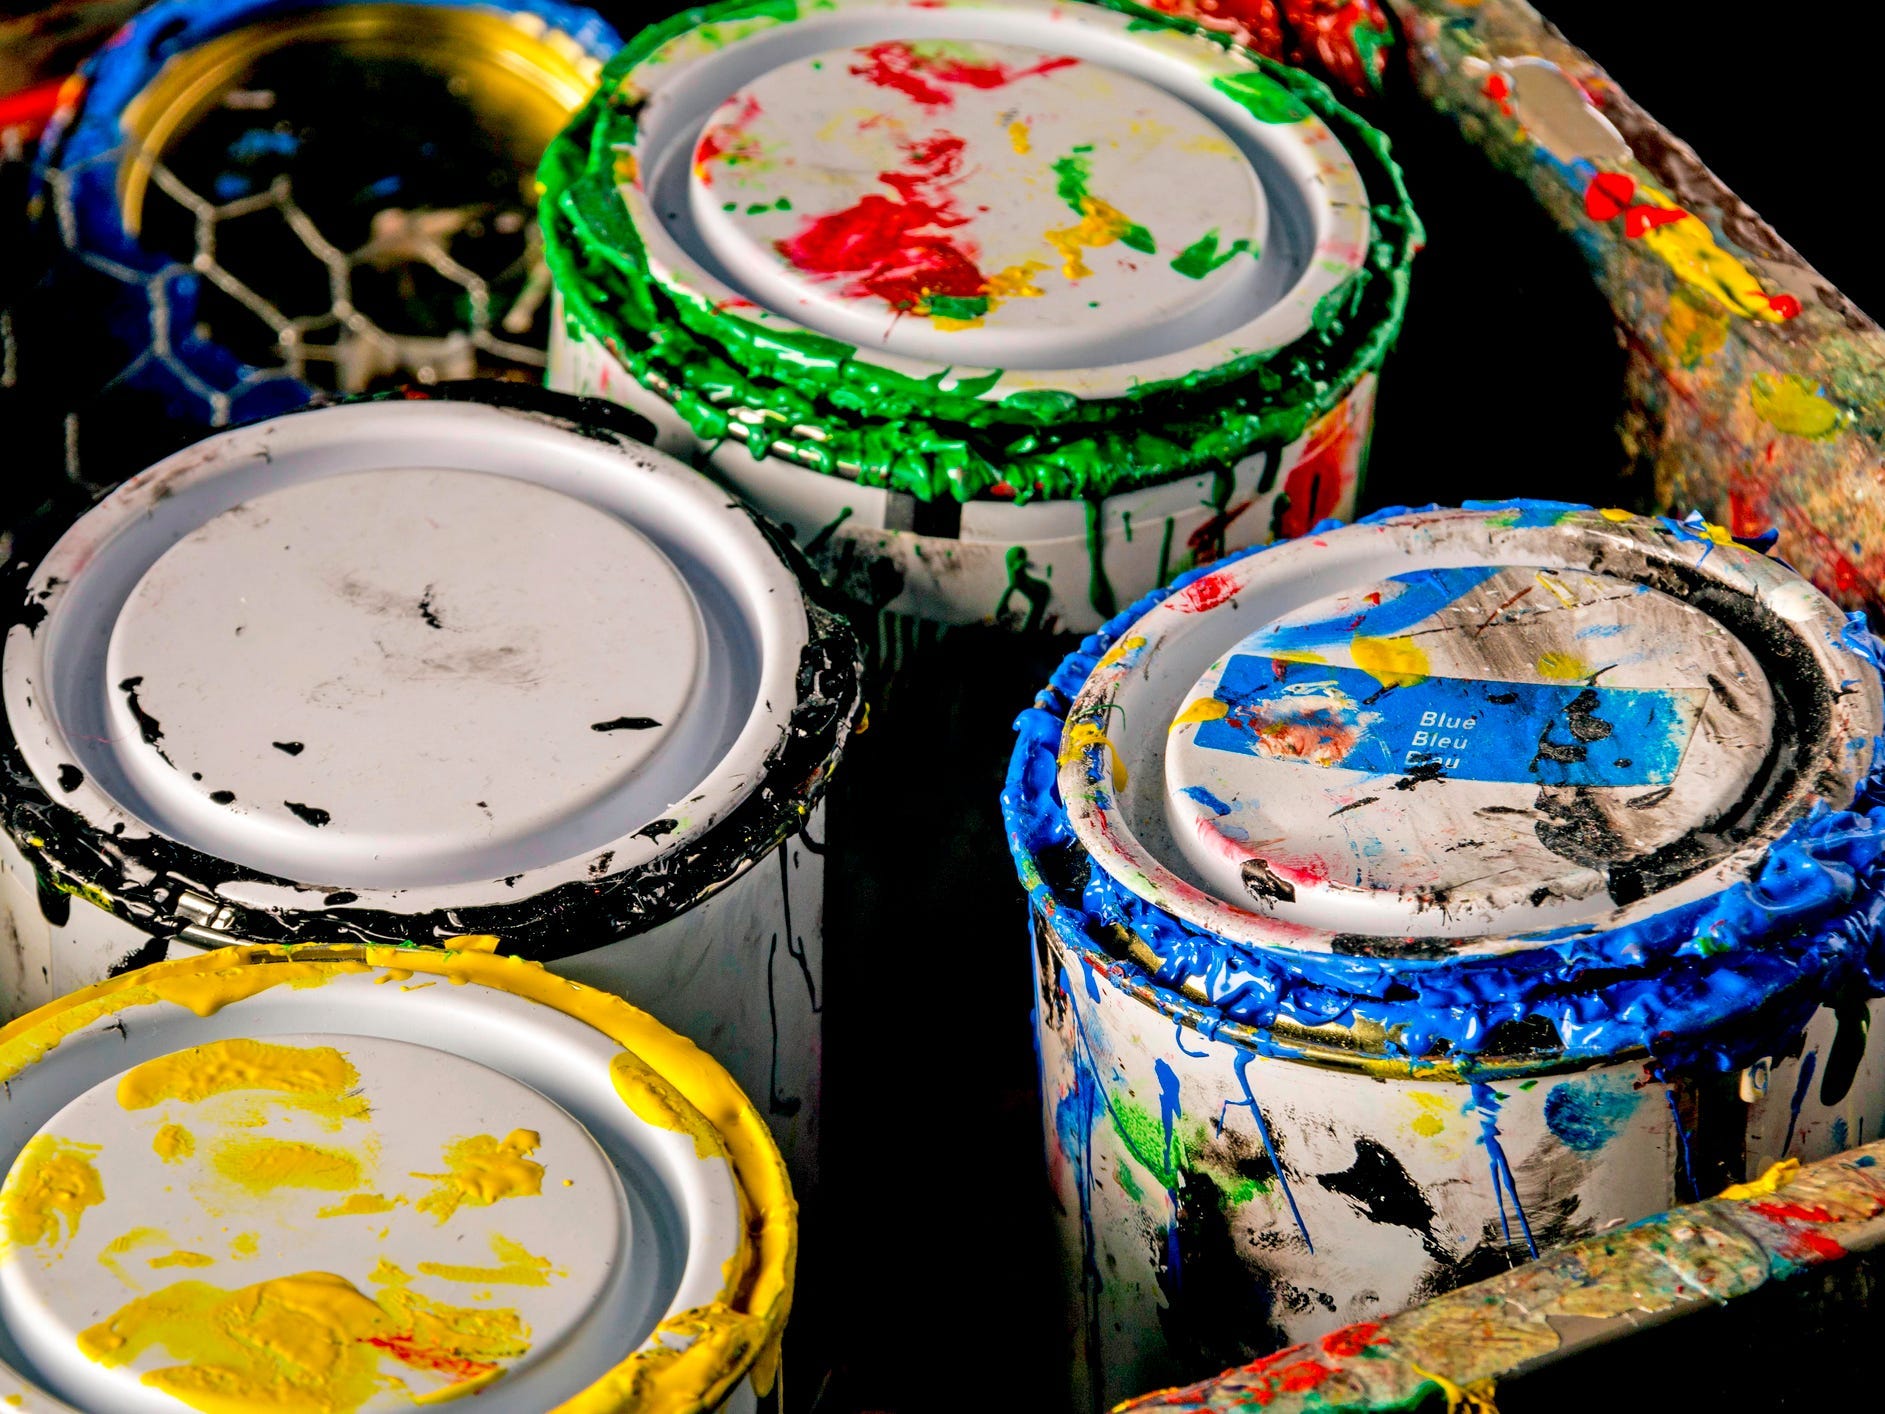 Old paint cans in a wooden box